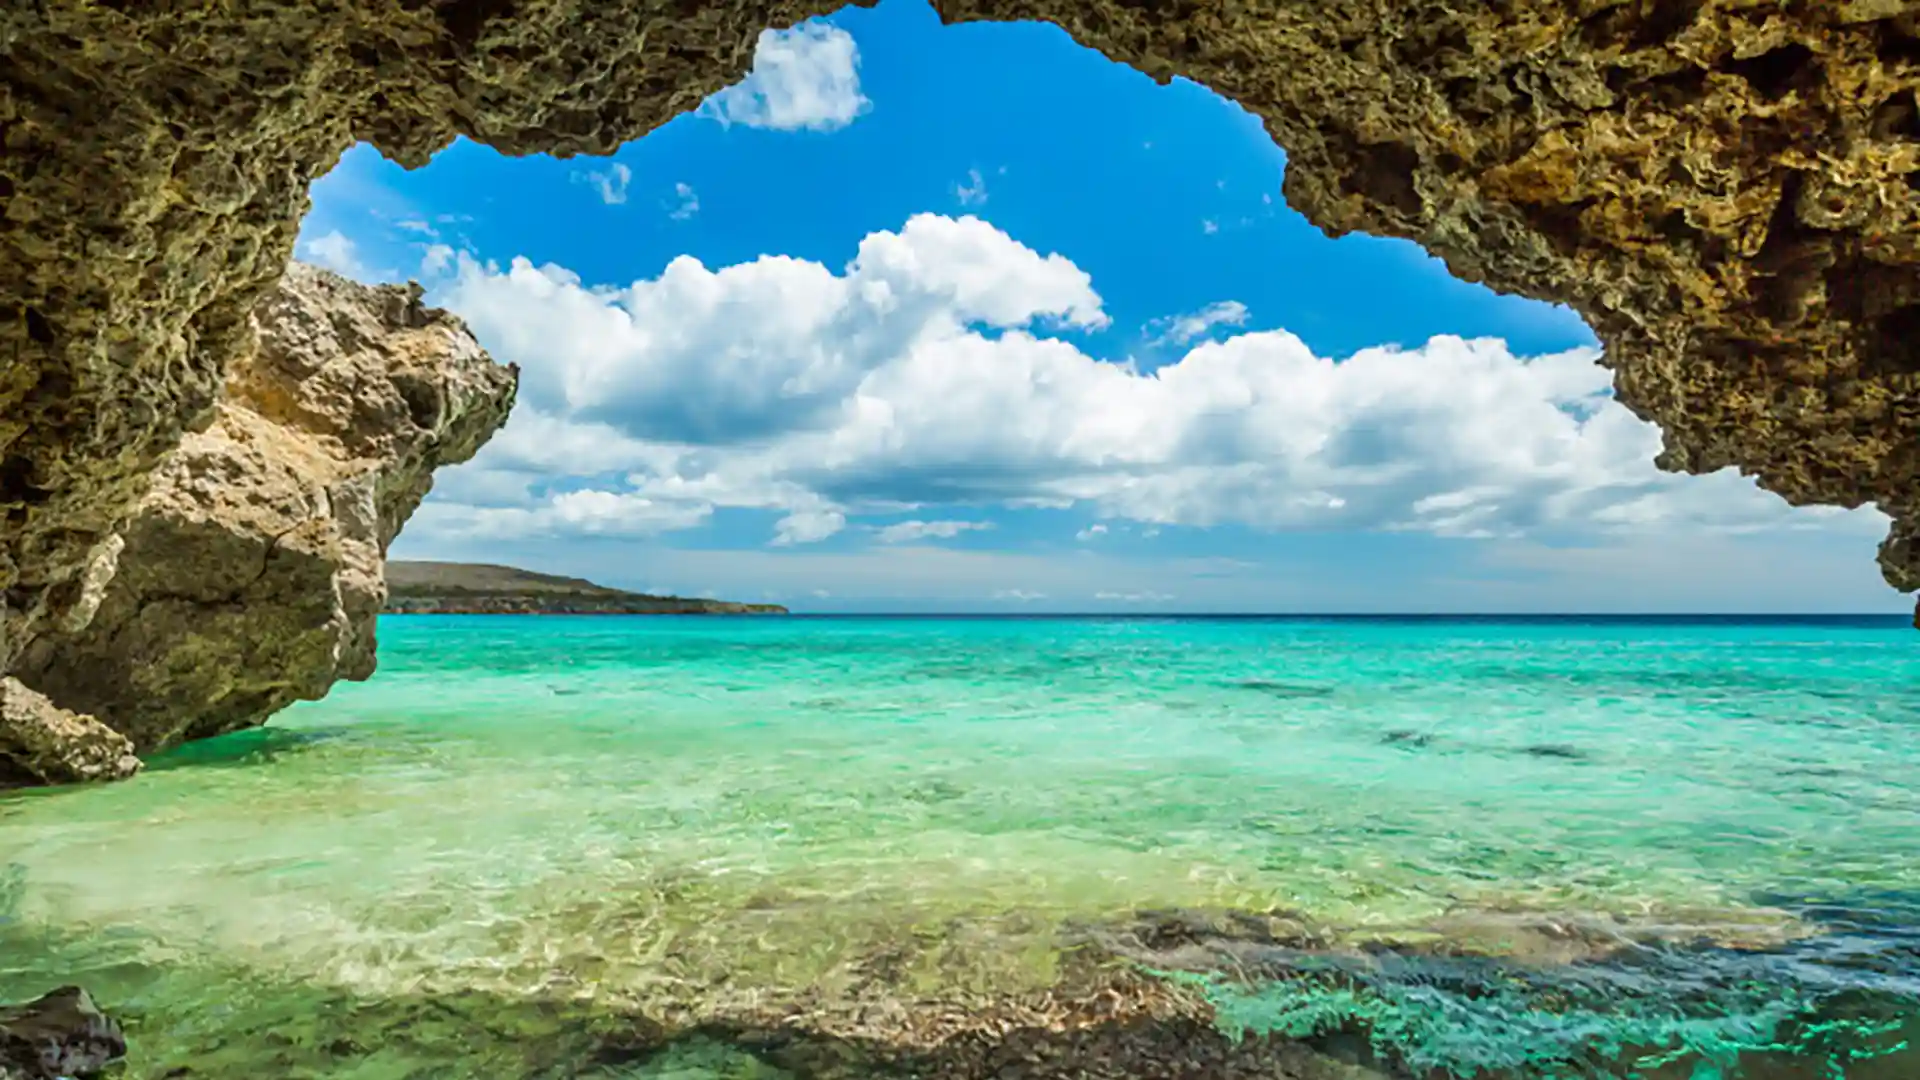 View of bright blue ocean waters from a cave structure in Curacao.